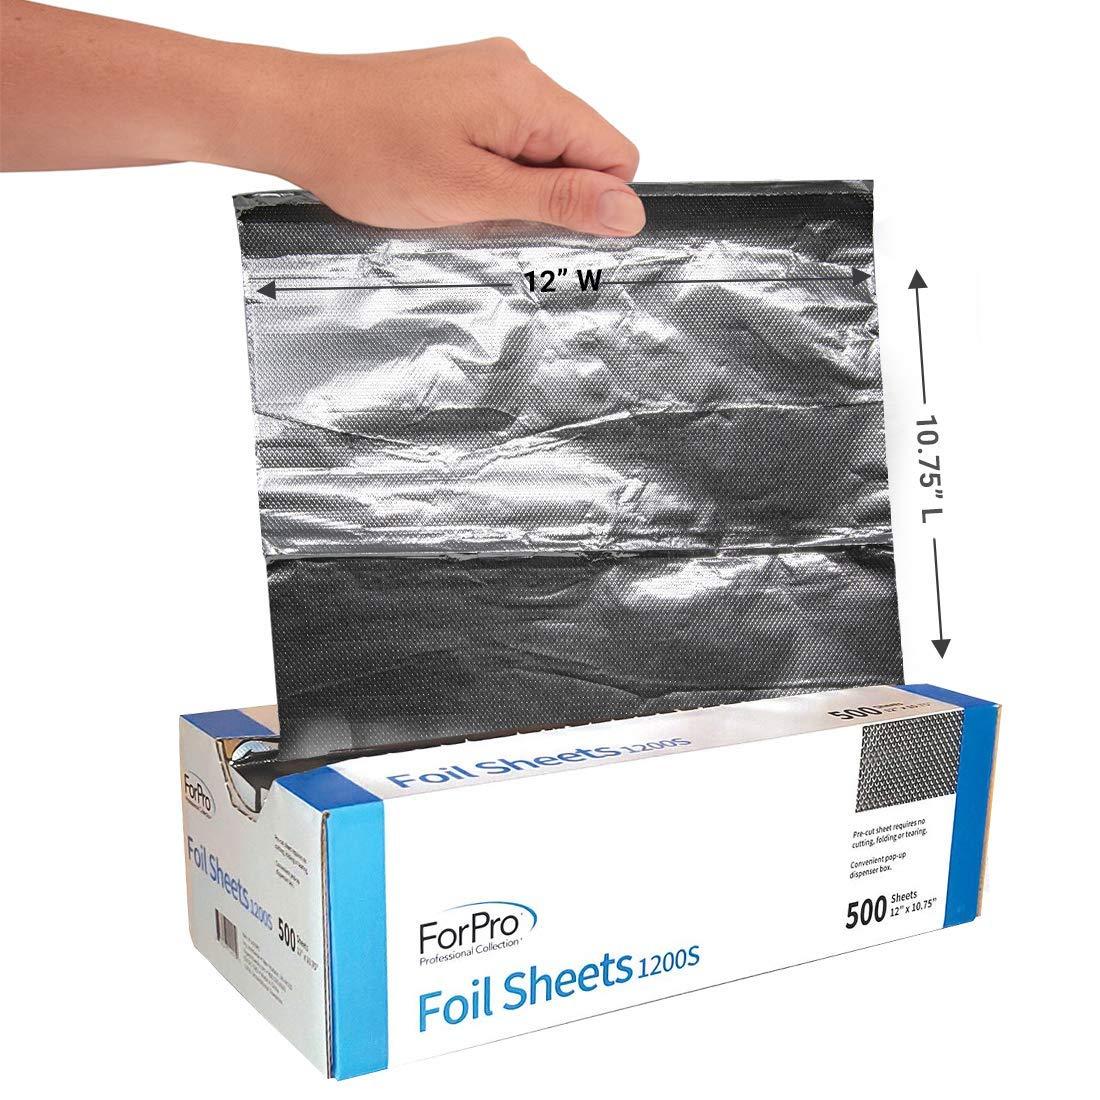 ForPro Embossed Pop-Up Foil Sheets 1200S, 12 Aluminium Foil Sheets, Pop-Up  Dispenser, for Hair Color Application and Highlighting, Food Safe, 12 W x  10.75 L, 500-Count 500-Count (Pack of 1)